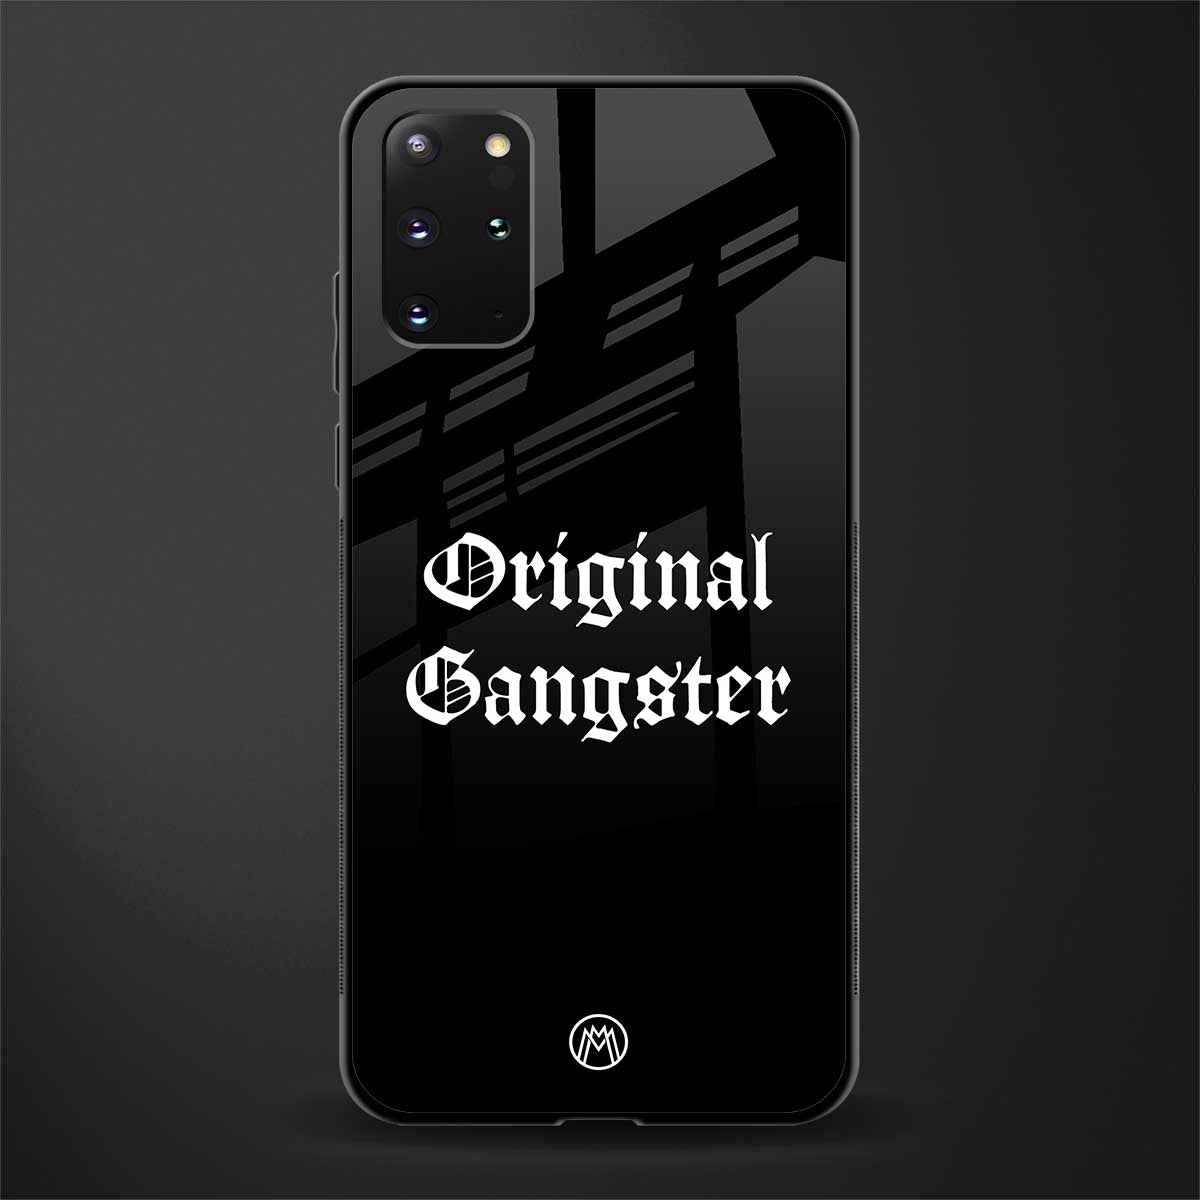 original gangster glass case for samsung galaxy s20 plus image